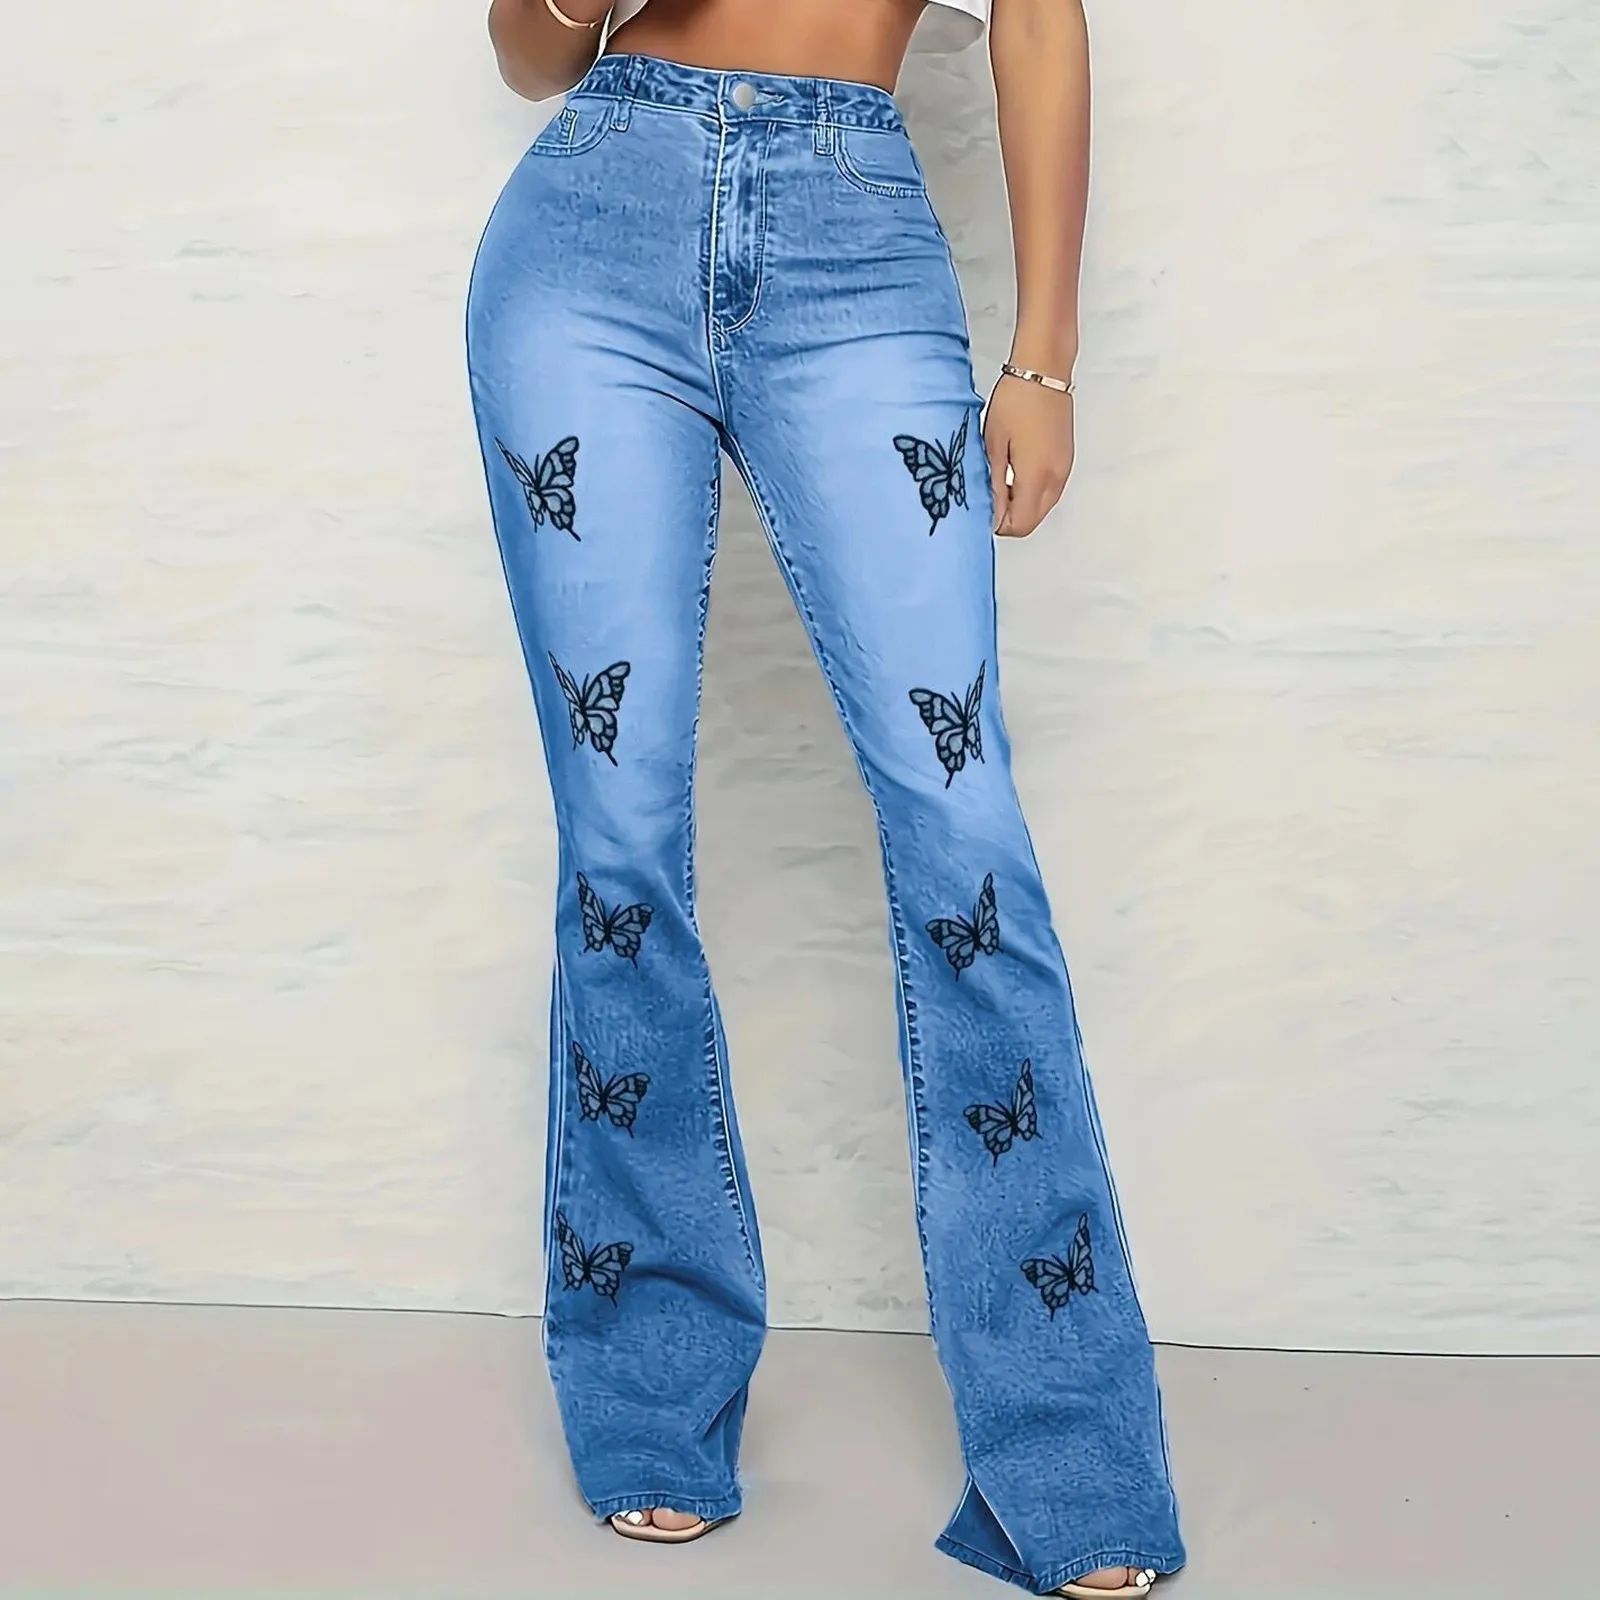 Stretchy Women Flare Jeans Pant Butterfly Embroidery Slim Fit Bell Bottoms Skinny Jeans Woman High Waist Mom Jeans Trousers